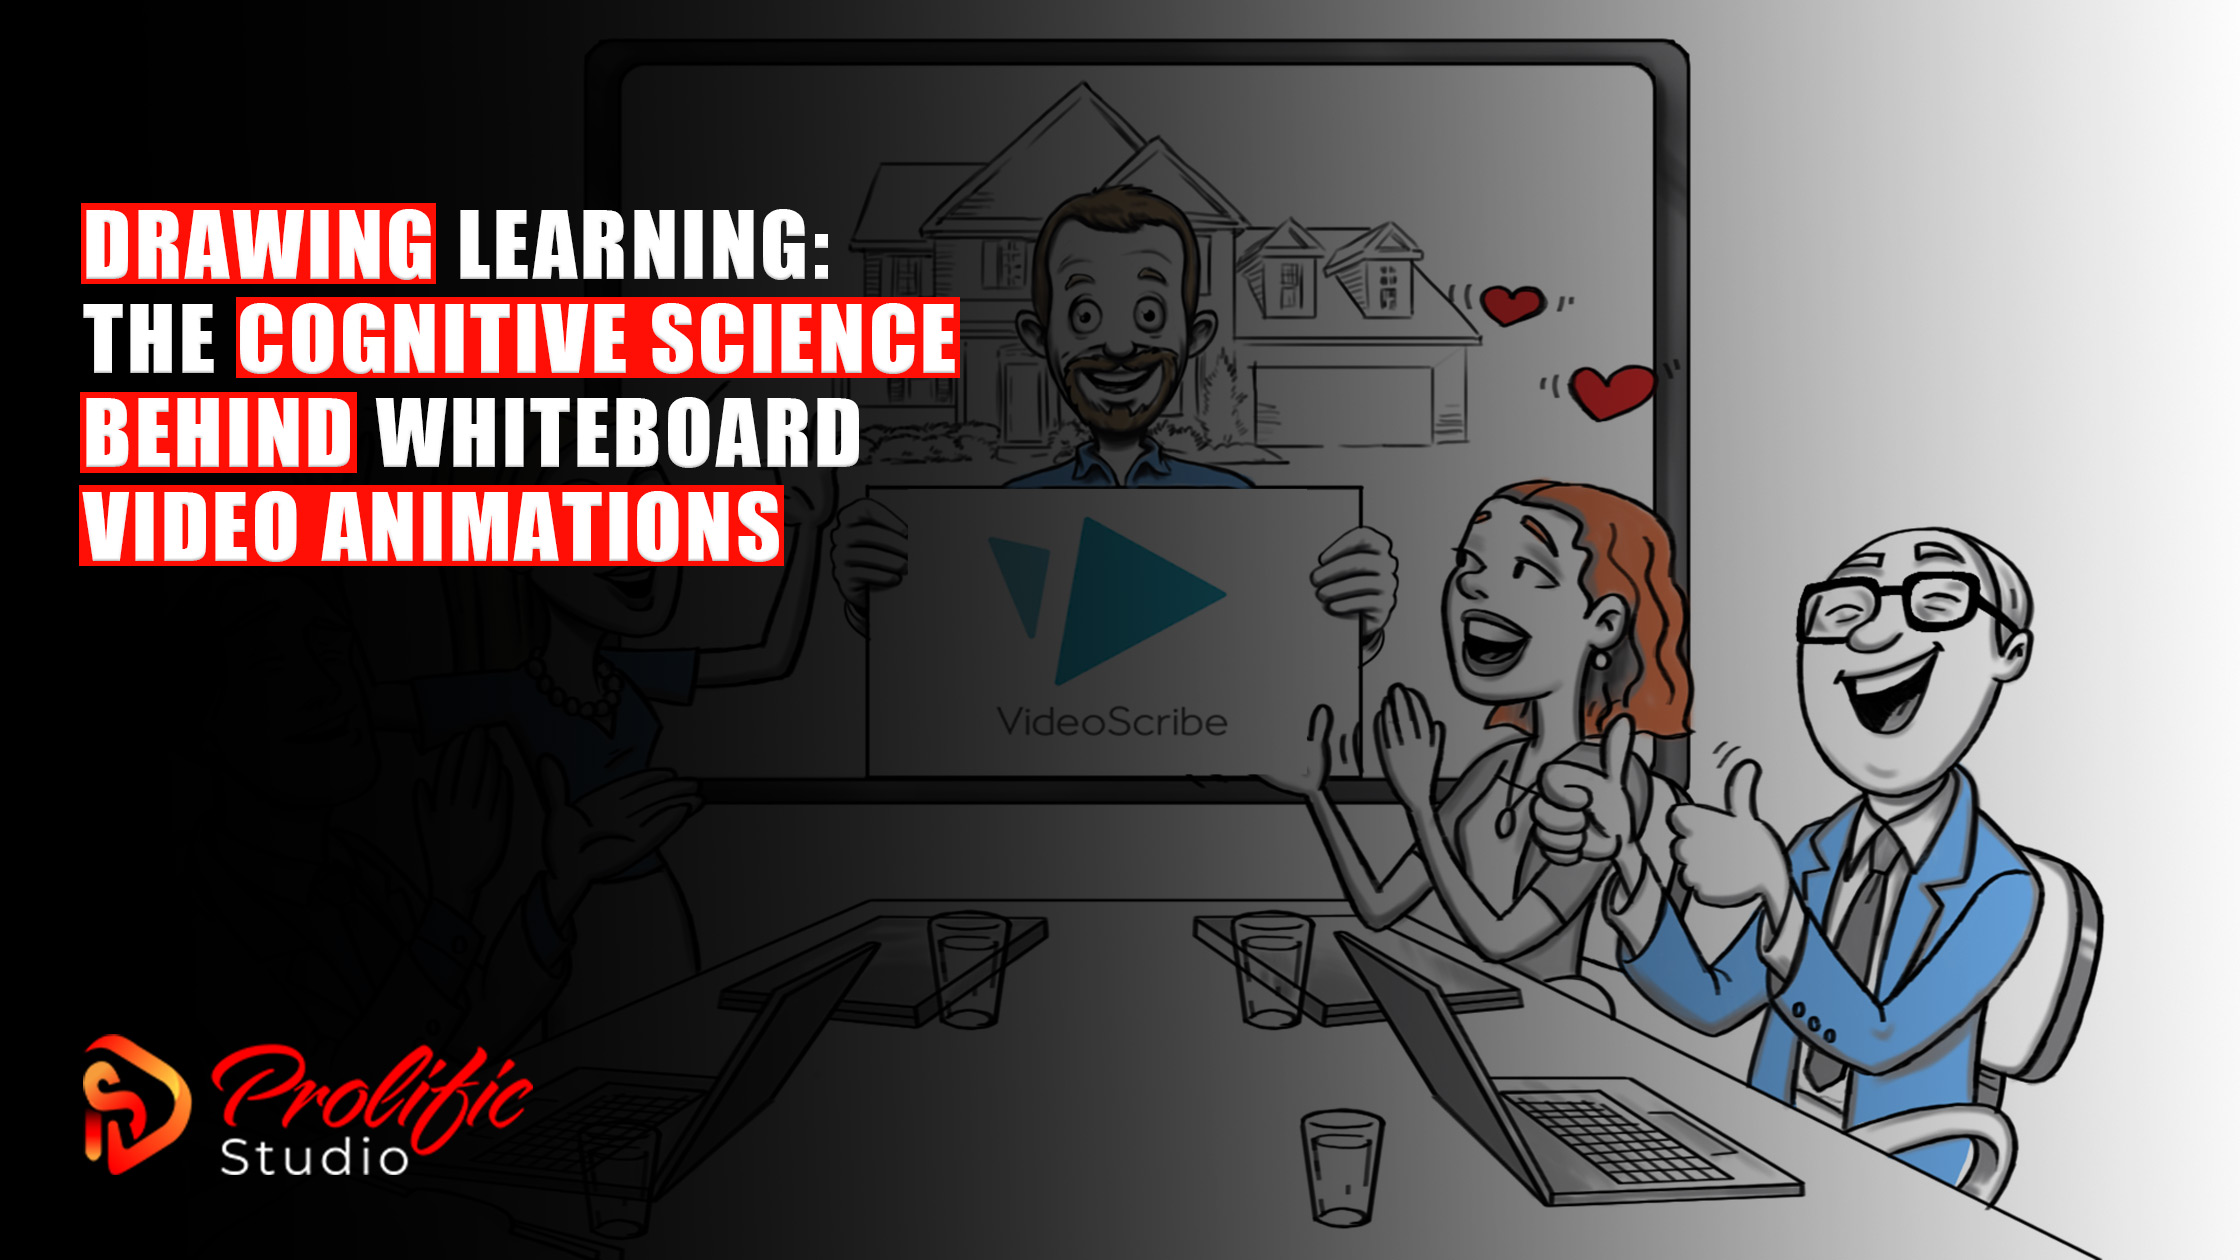 Drawing Learning The Cognitive Science Behind Whiteboard Video Animations